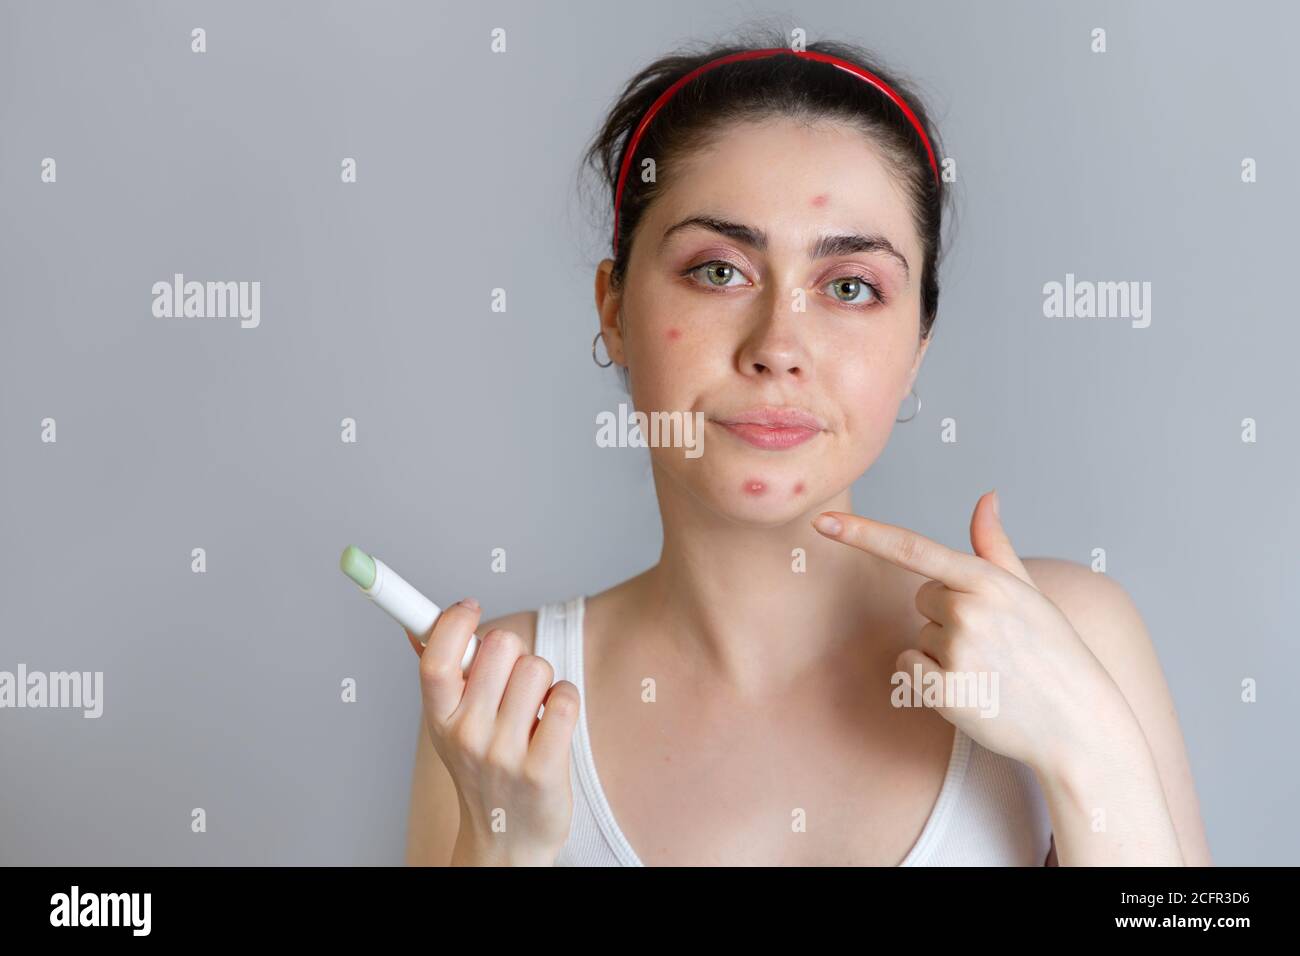 A disgruntled young woman points to acne on her chin. The concept of acne, growing up and cosmetology. Copy space. Stock Photo